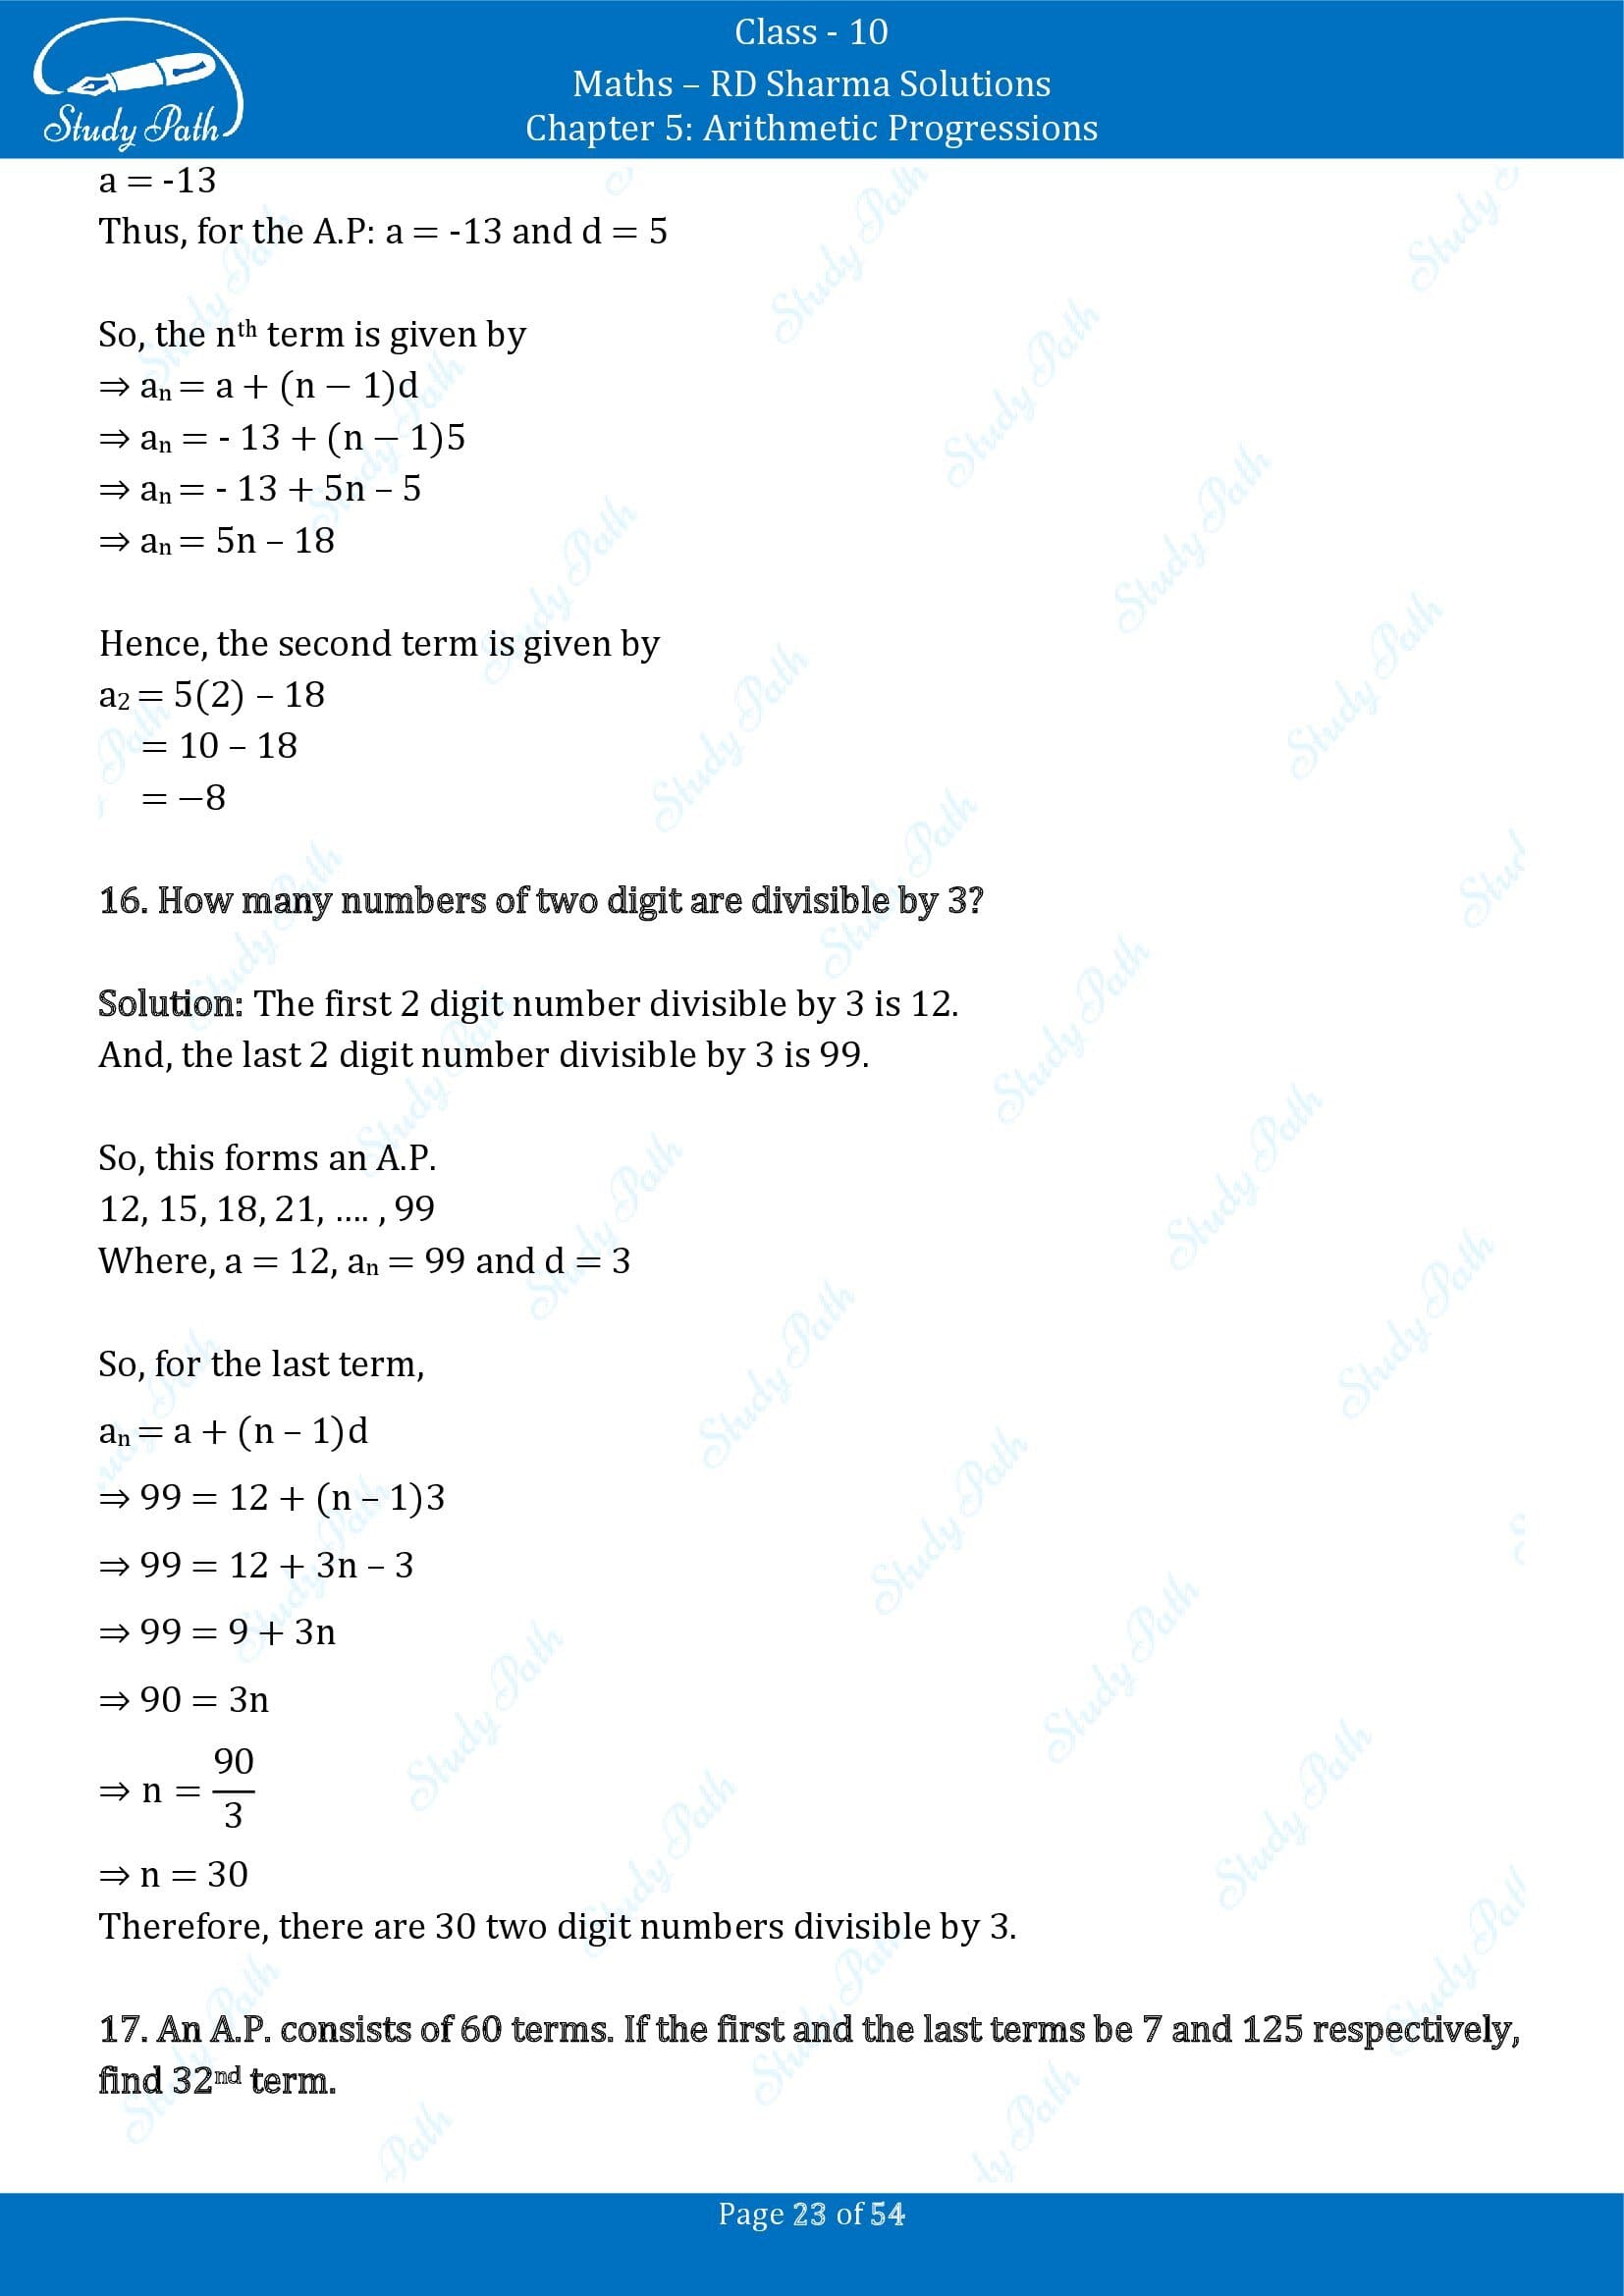 RD Sharma Solutions Class 10 Chapter 5 Arithmetic Progressions Exercise 5.4 00023